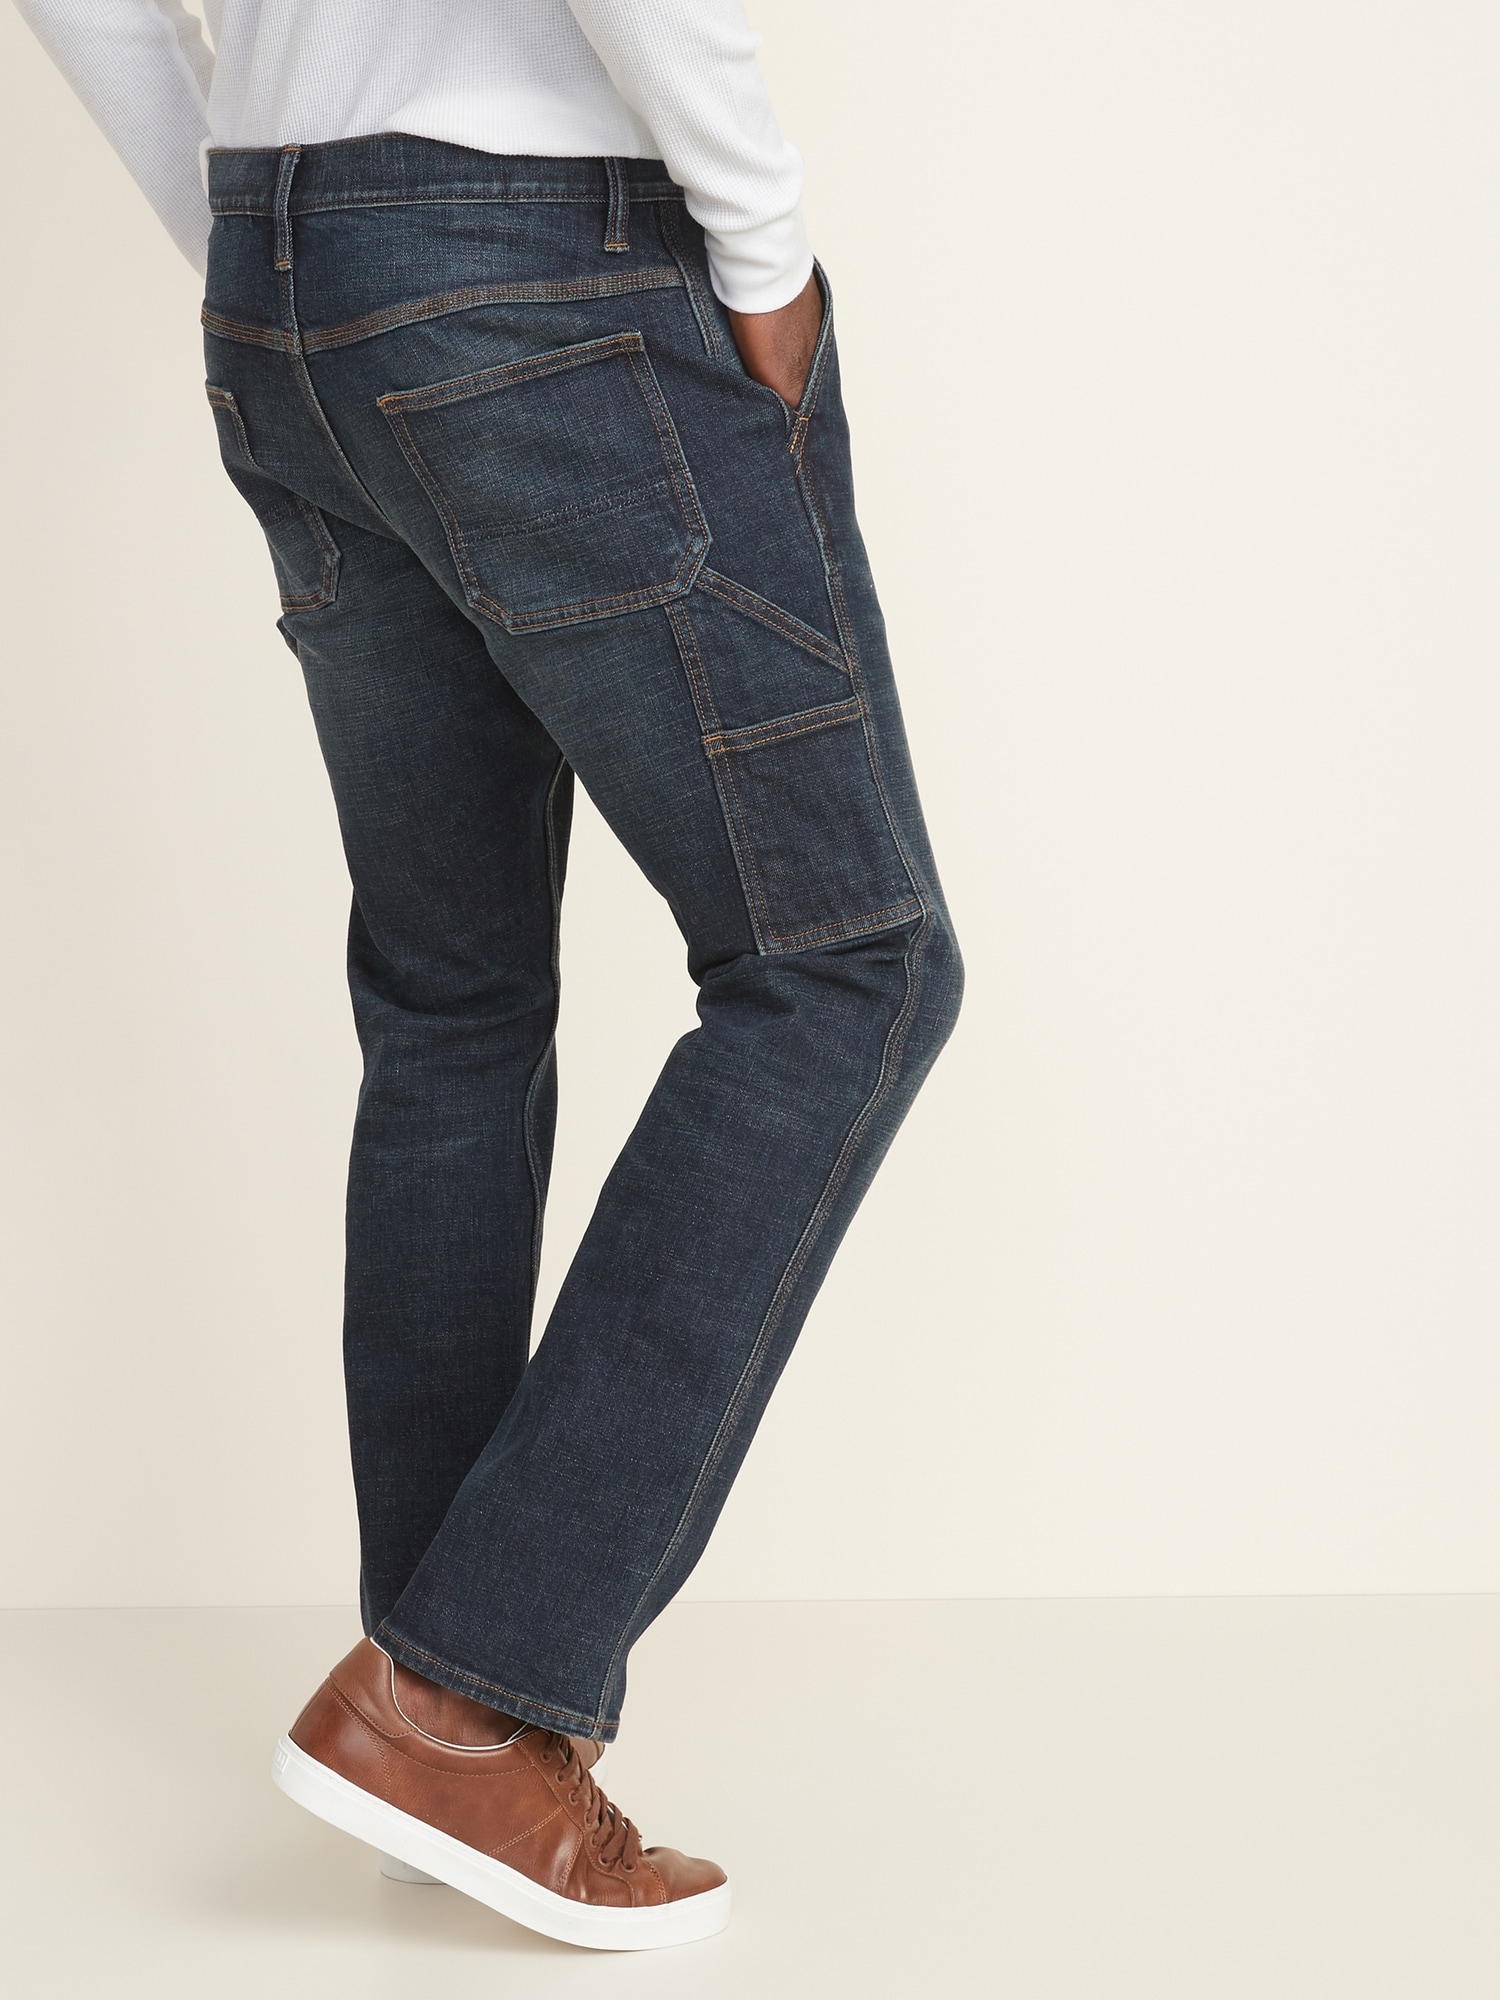 old navy mens tall jeans